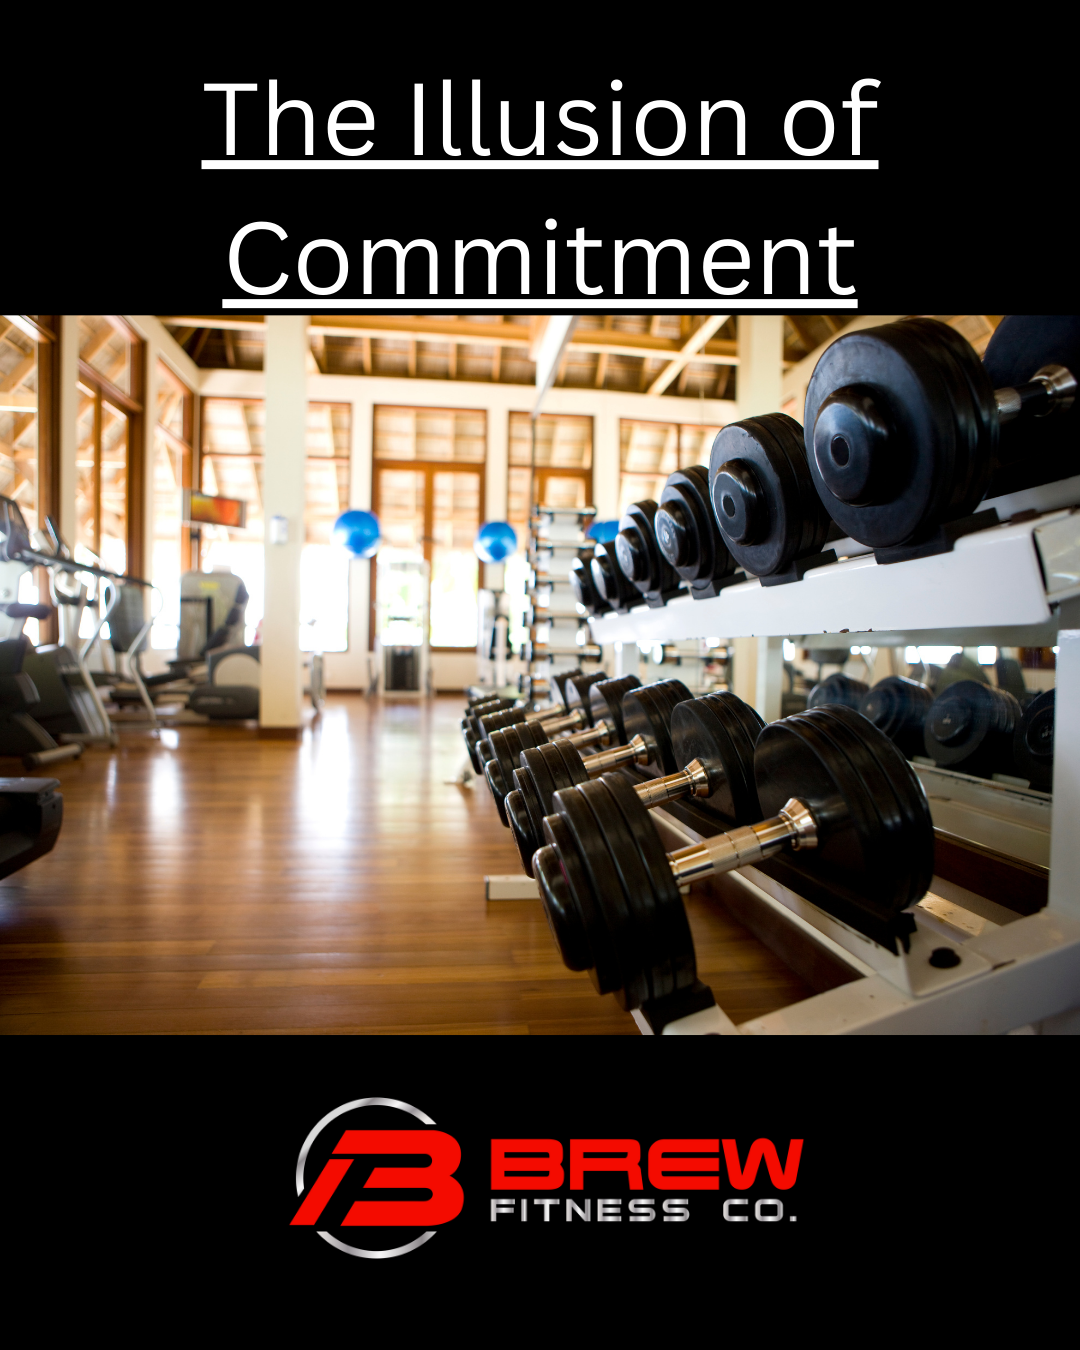 The Illusion of Commitment